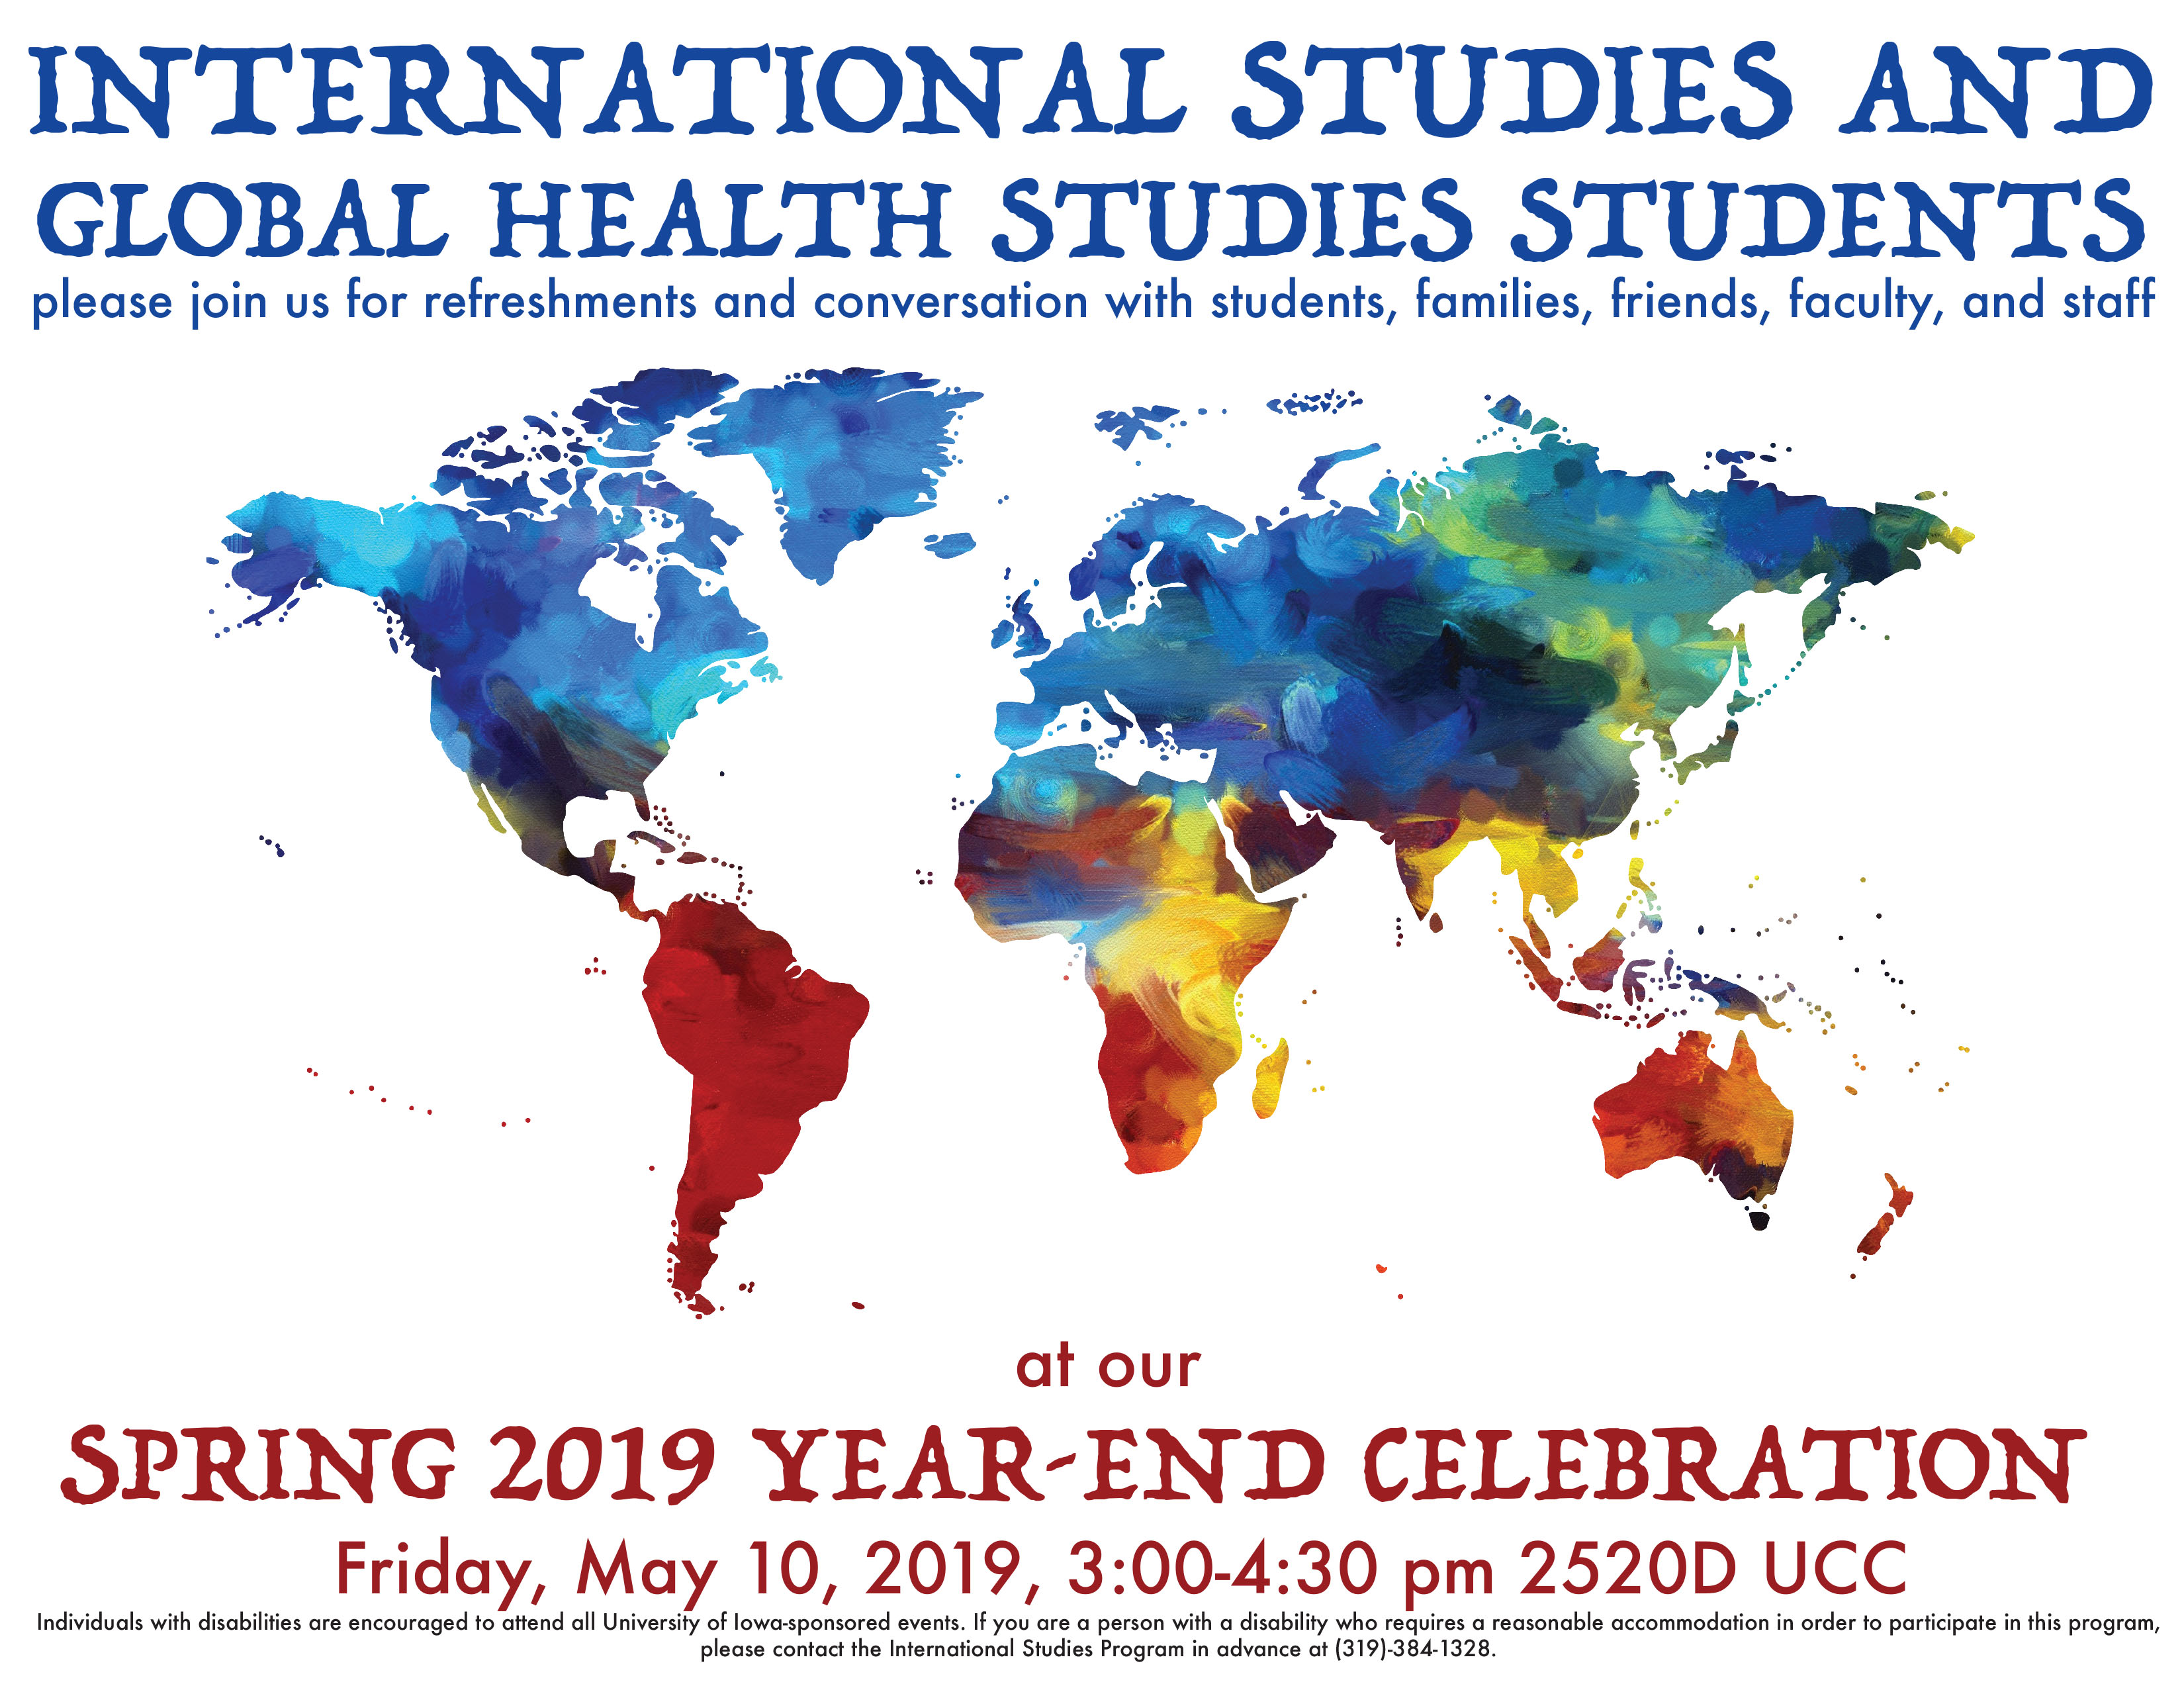 International Studies and Global Health Studies Students - 2019 Year-End Celebration poster